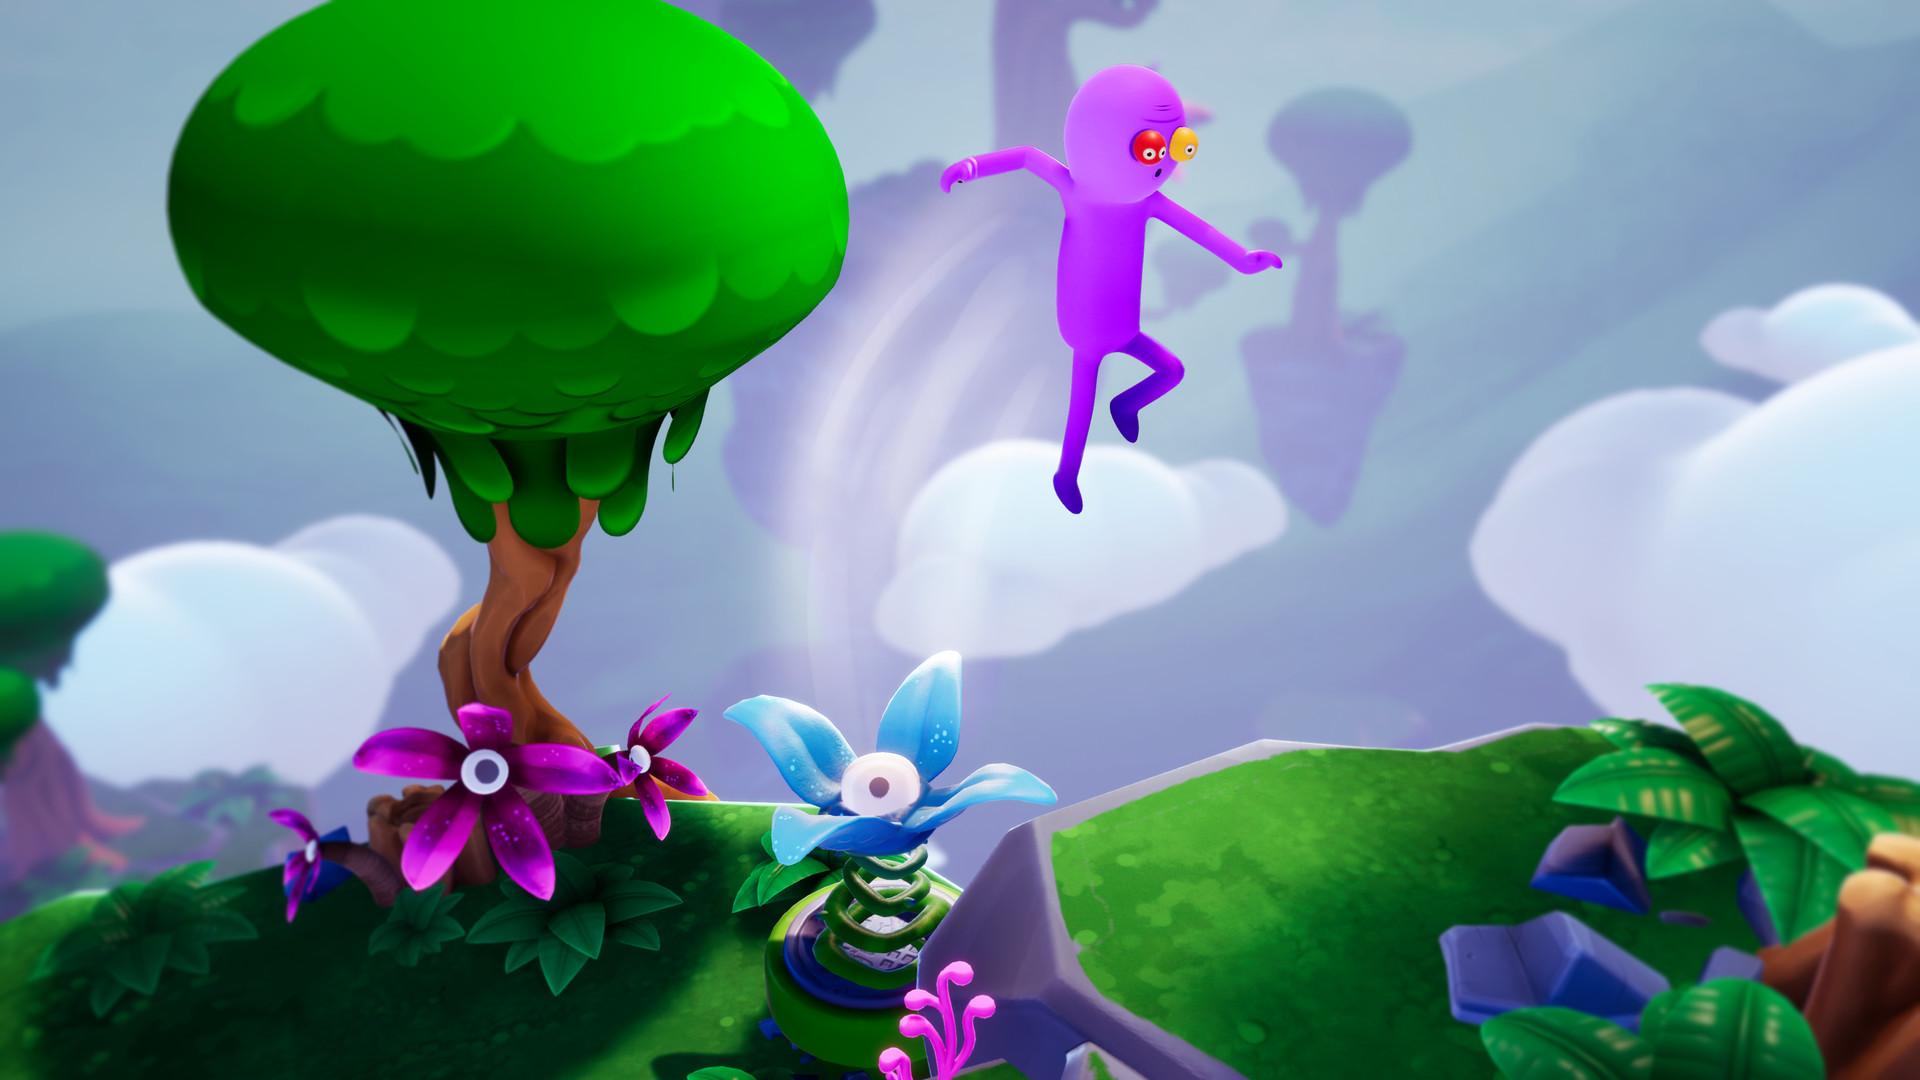 GDC 2019: Justin Roiland's Next VR Game 'Trover Saves the Universe